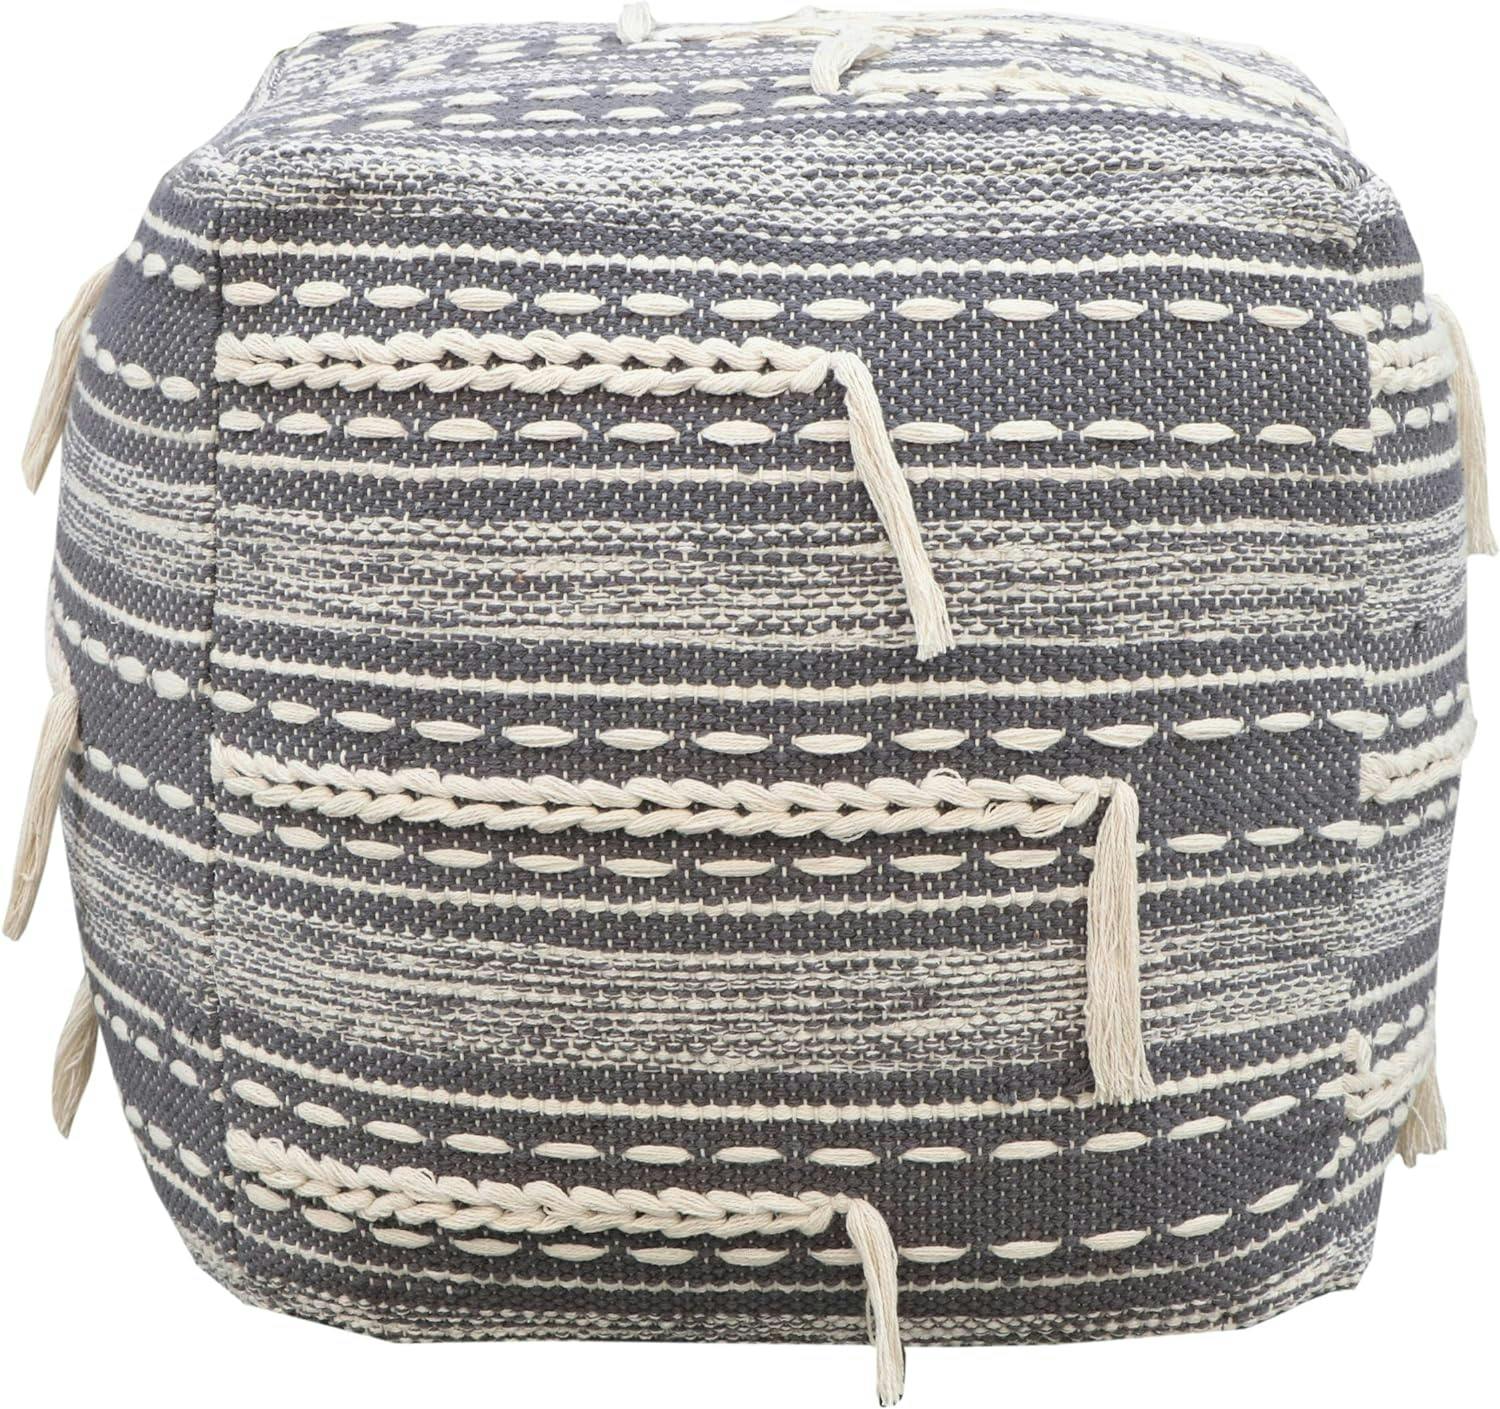 Tassel-Trimmed Two-Tone Grey Woven Cotton Square Pouf